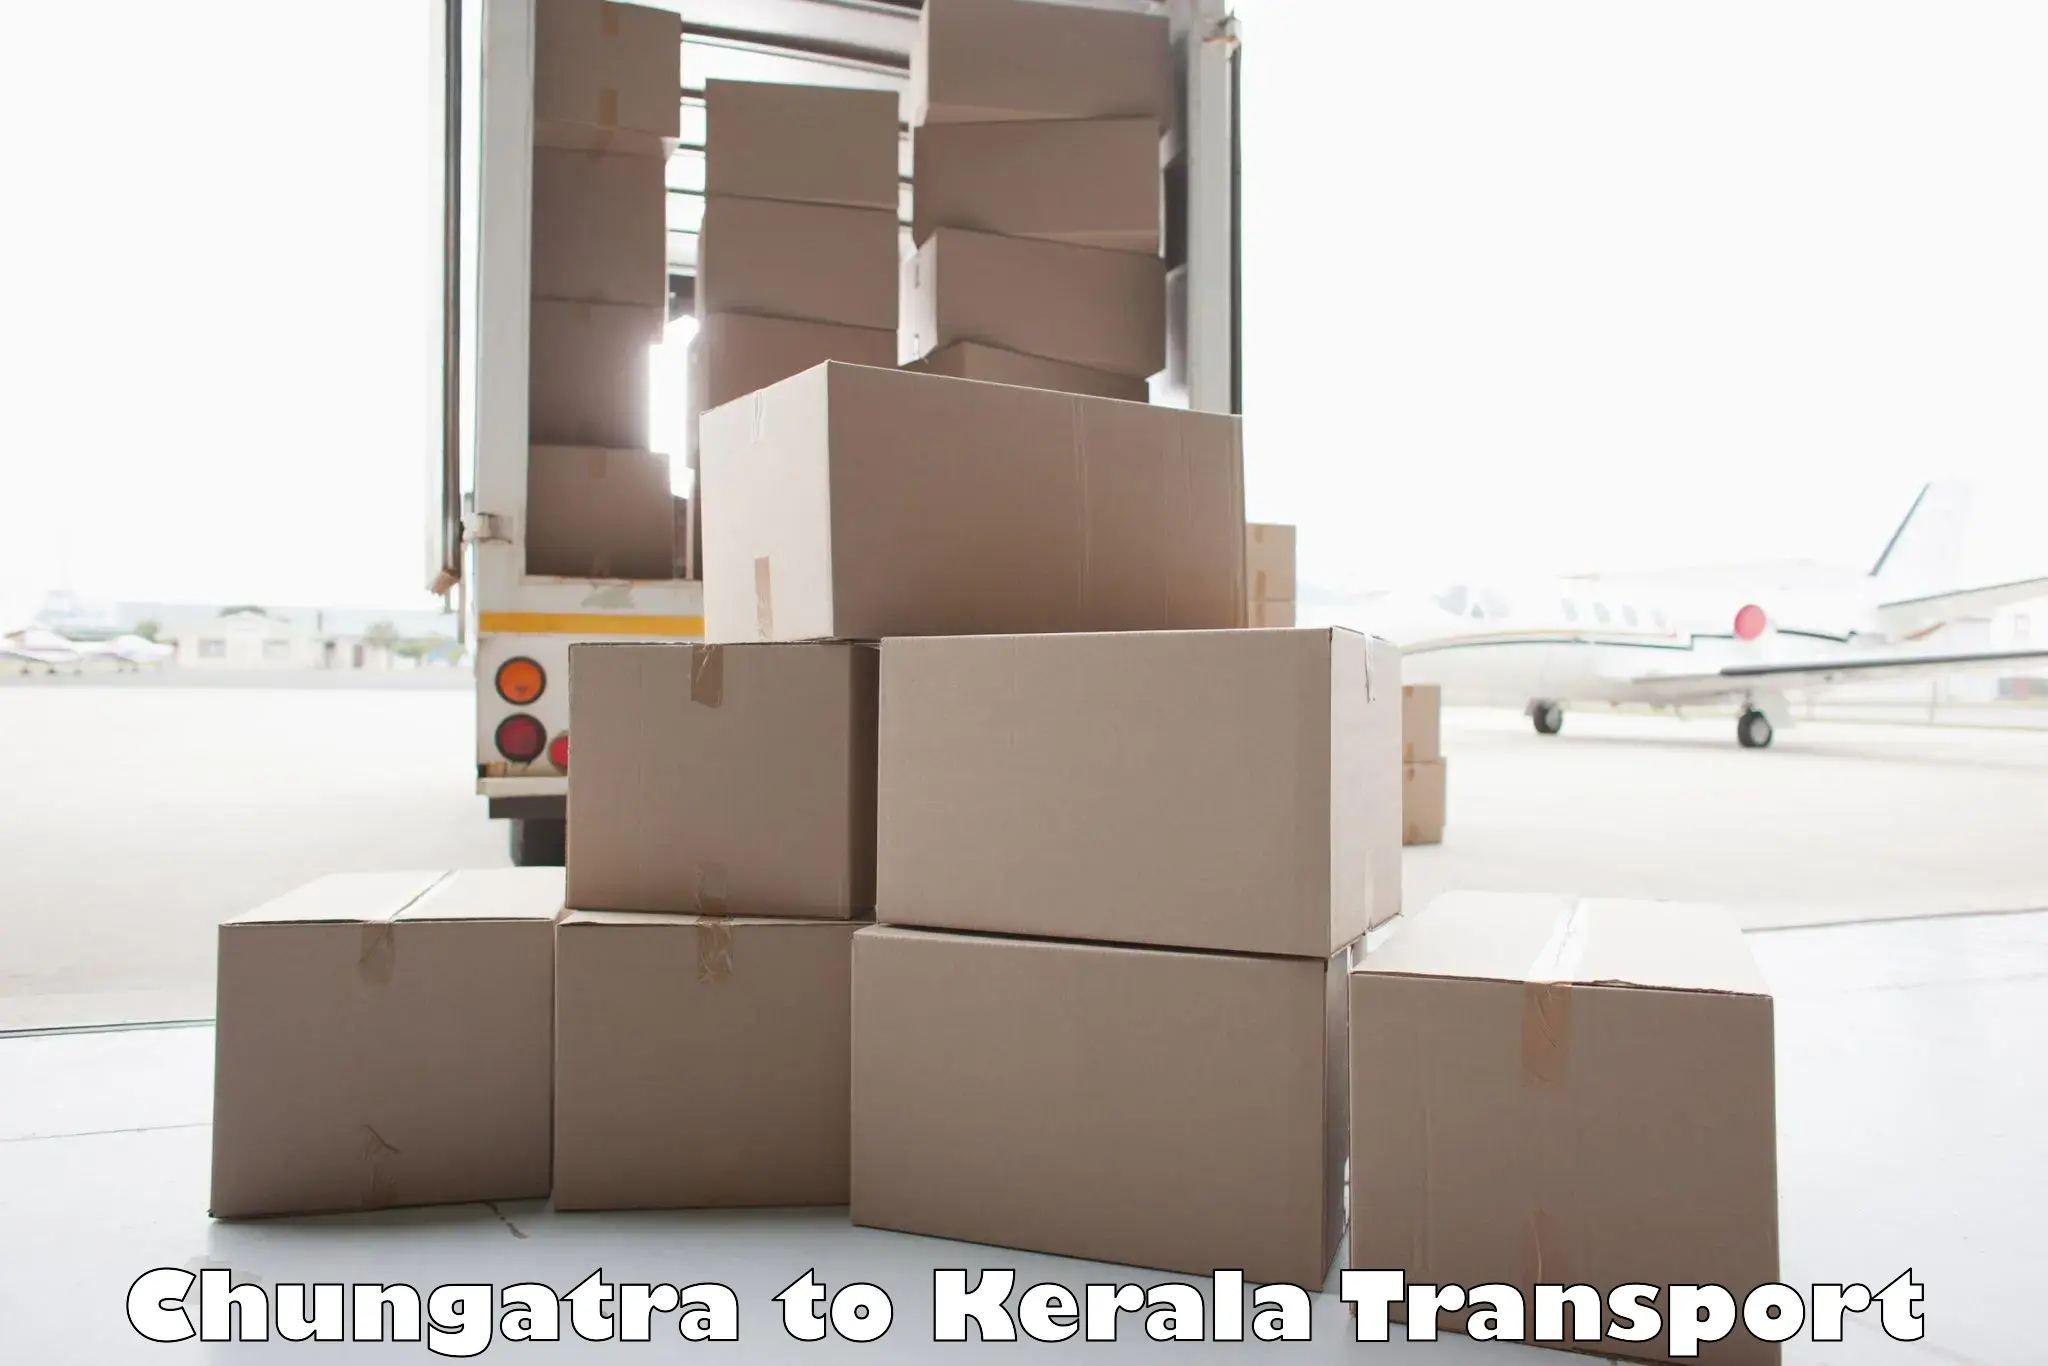 Interstate transport services in Chungatra to Anjumoorthy